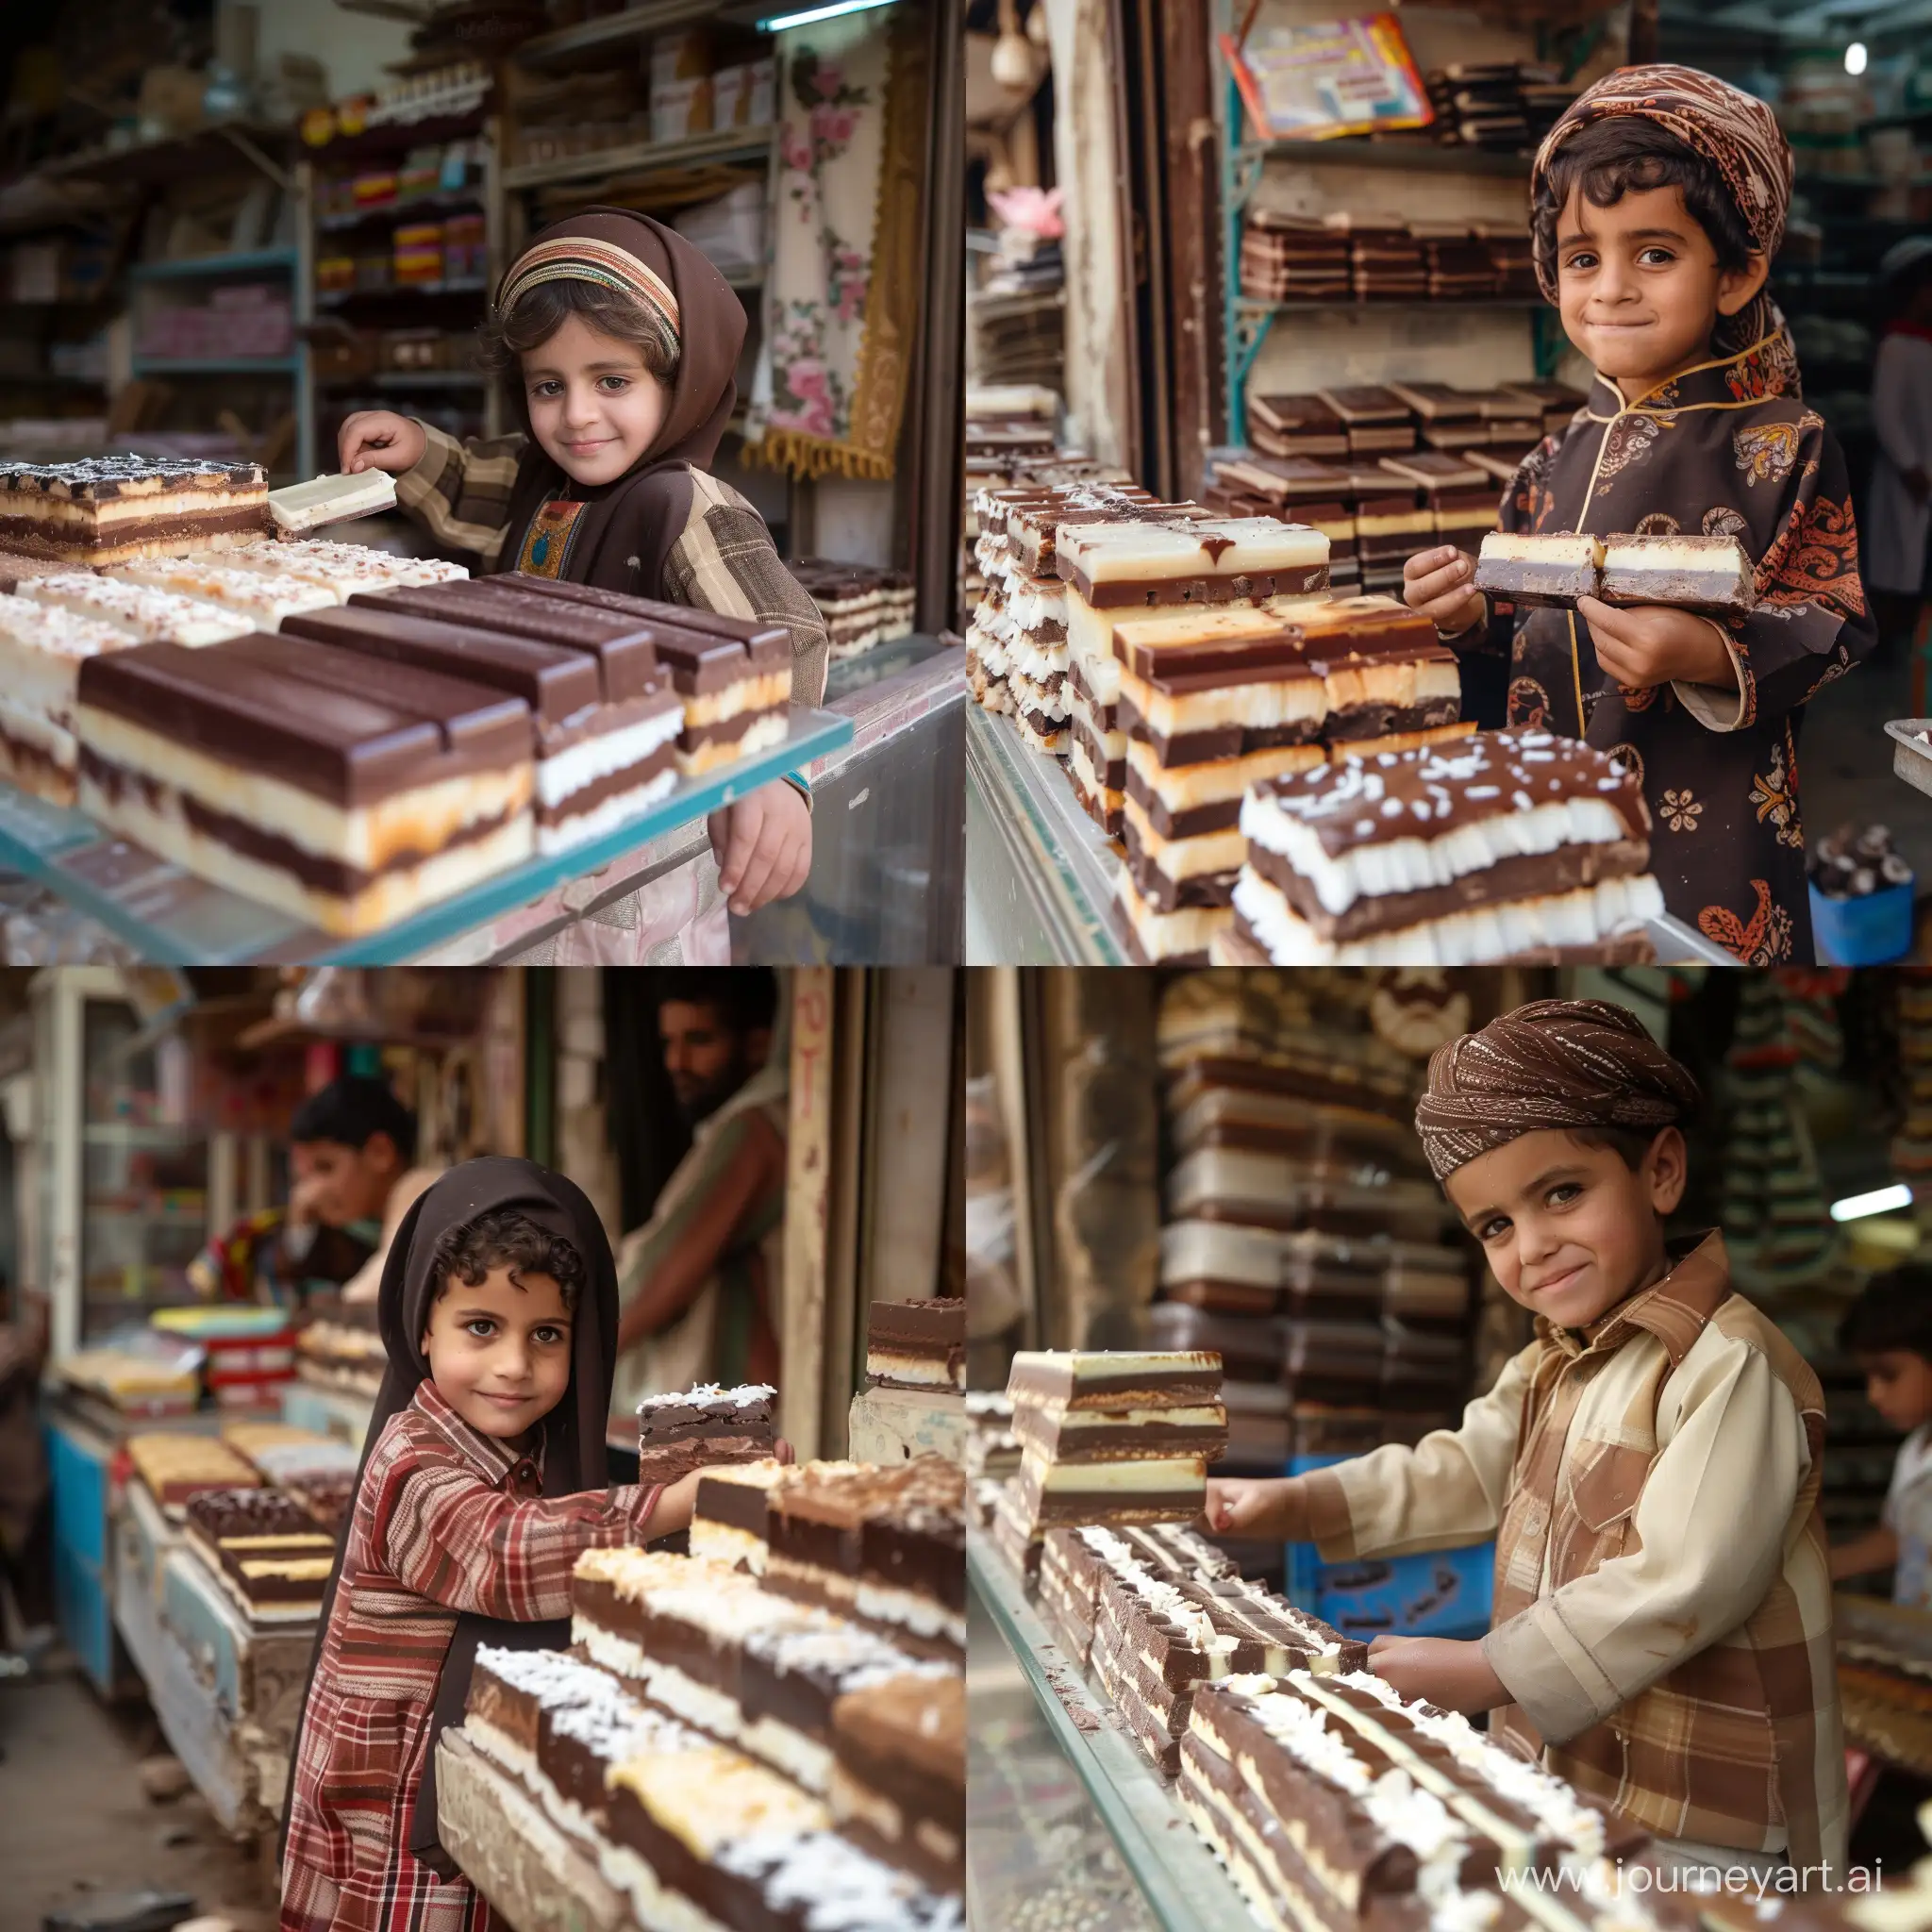 A cute Yemeni child wearing Yemeni clothes steals chocolate and coconut layered candy from a sweets store. the candy is rectangular.